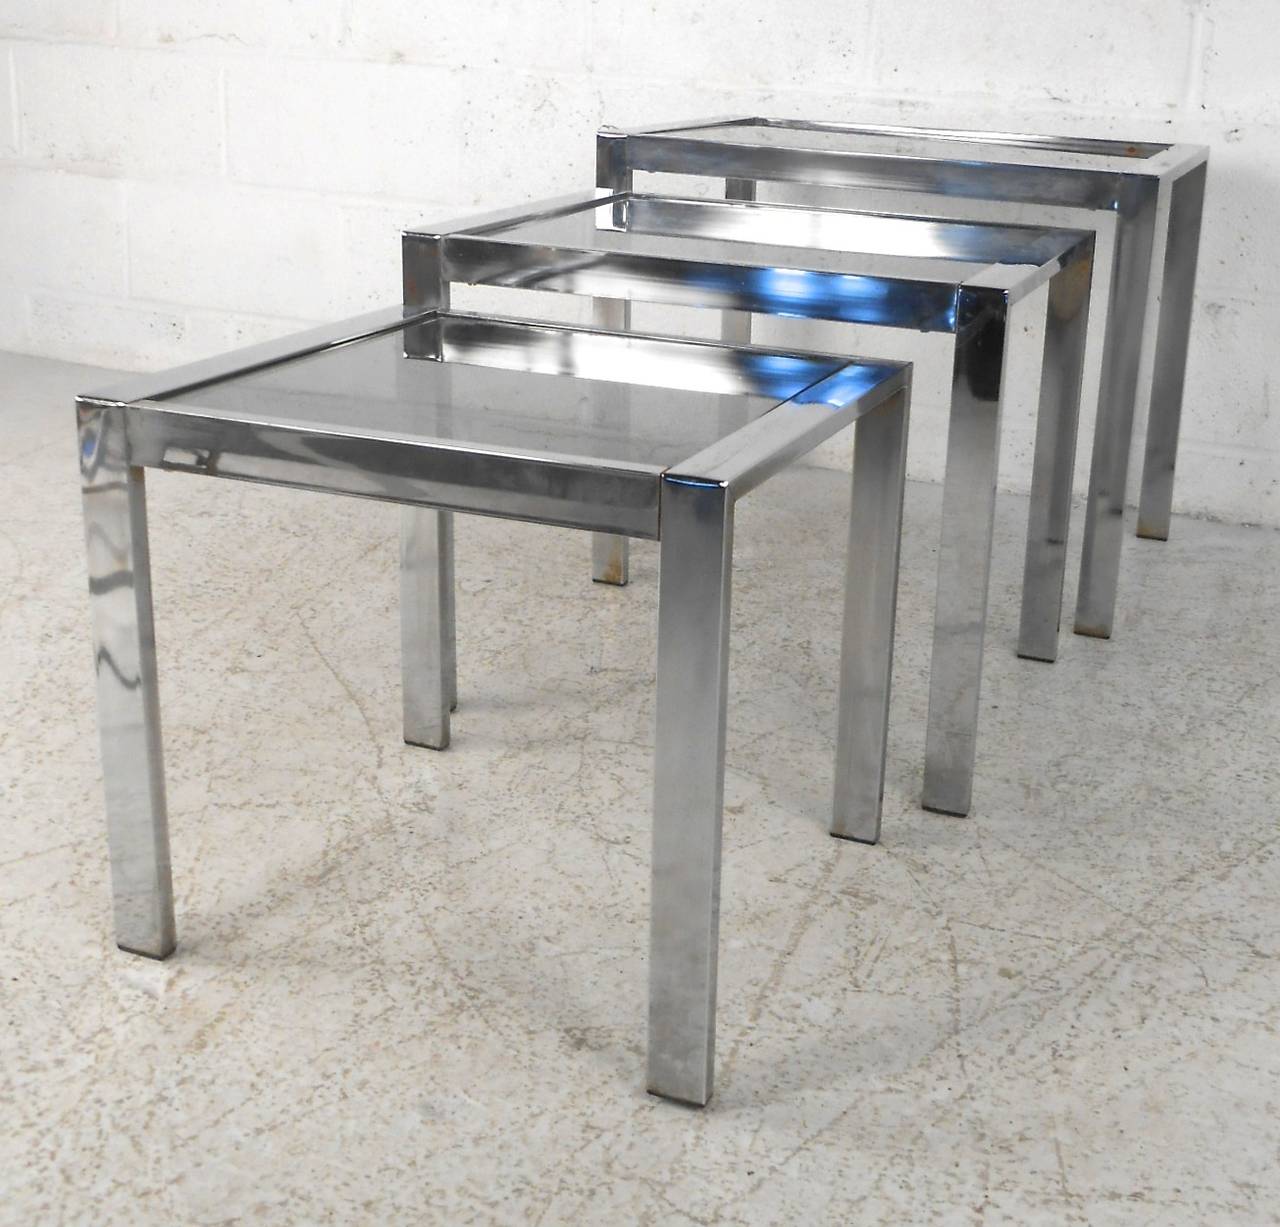 This set of three chrome tables feature vintage smoked glass tops set in sturdy nesting frames. Perfect for occasional use at home or office, please confirm item location (NY or NJ). Dimensions from 24-17 inches wide, 15-19 inches high.